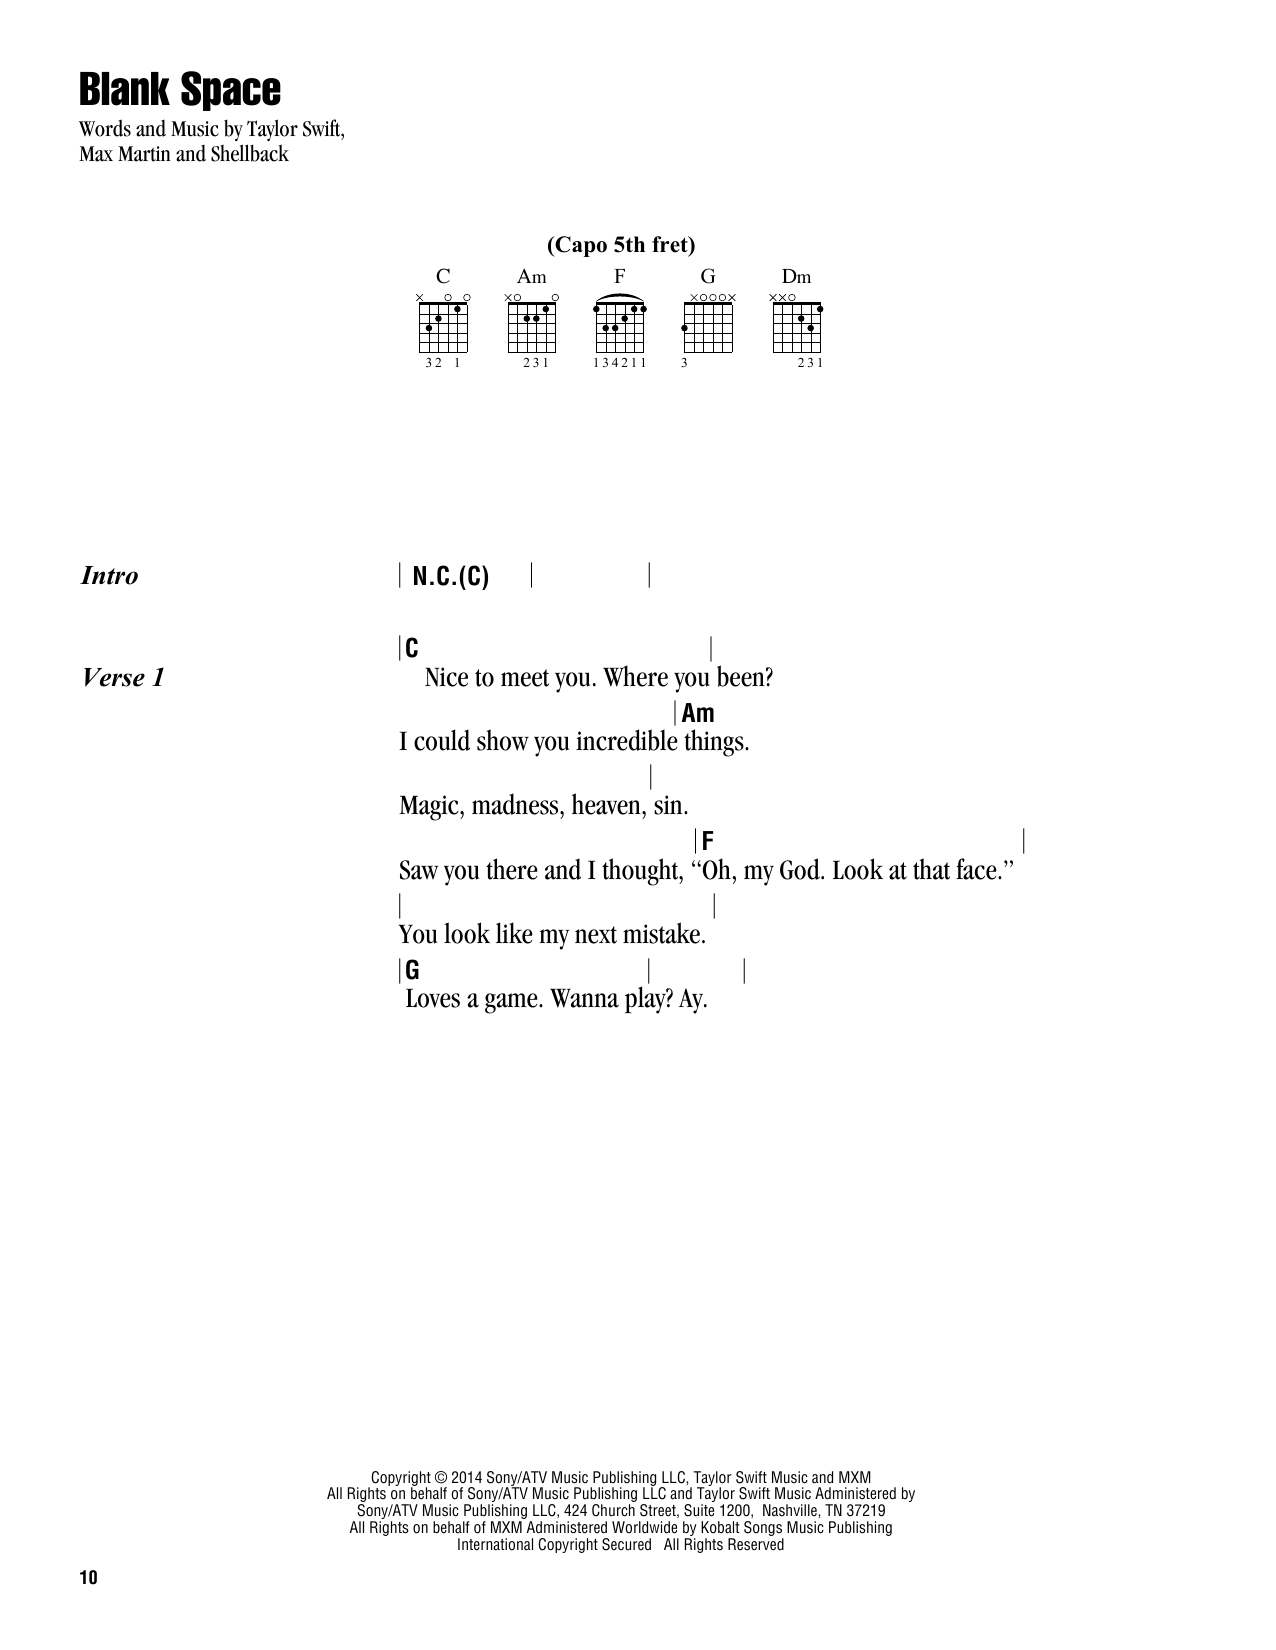 Download Taylor Swift Blank Space Sheet Music